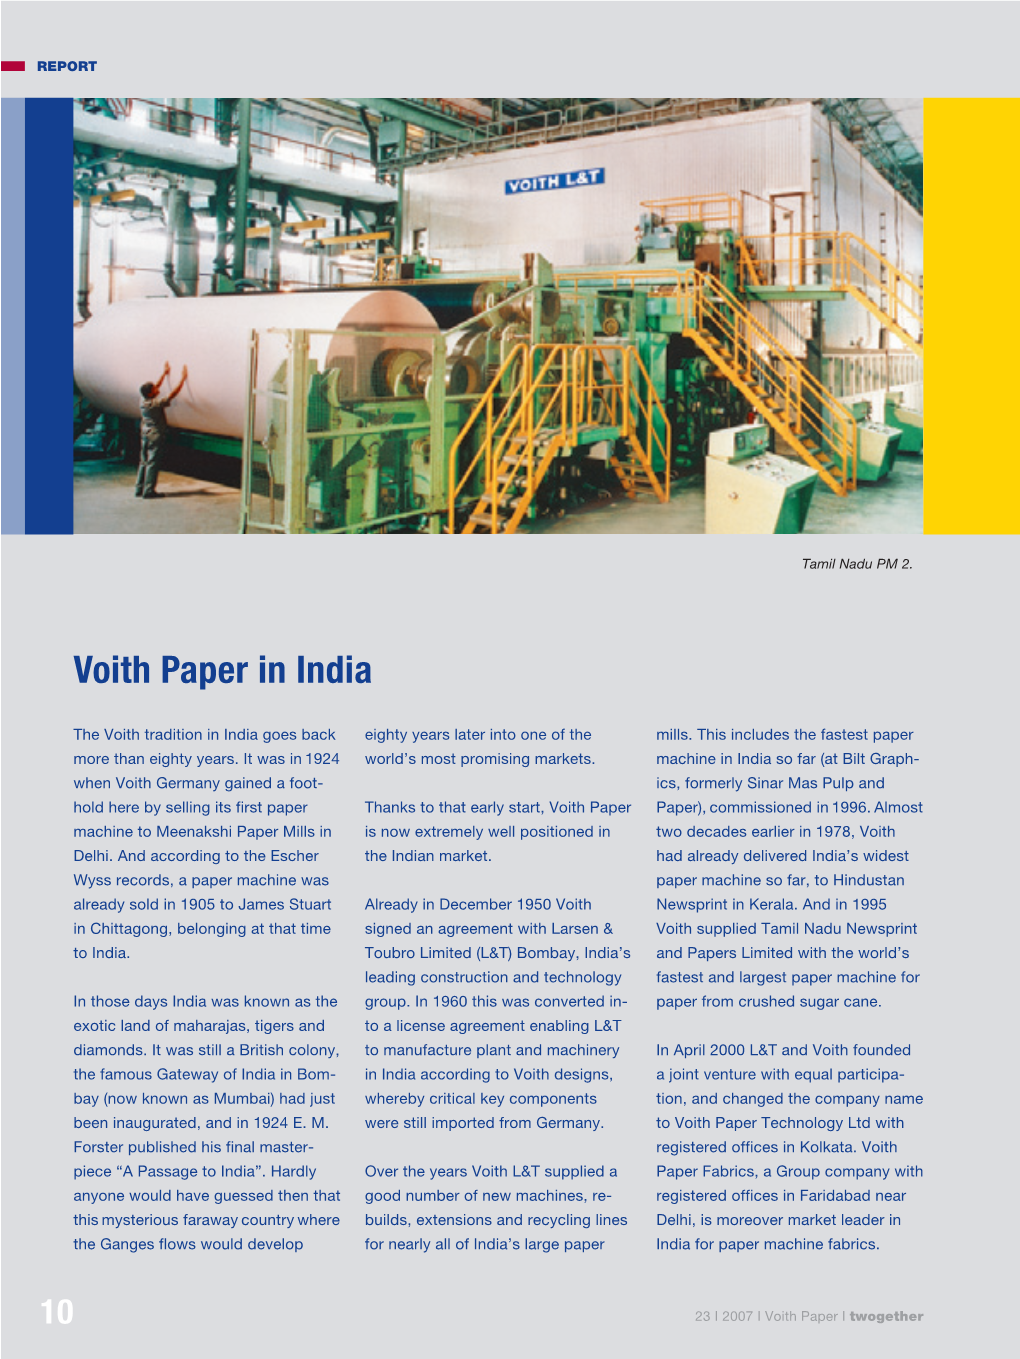 Voith Paper in India